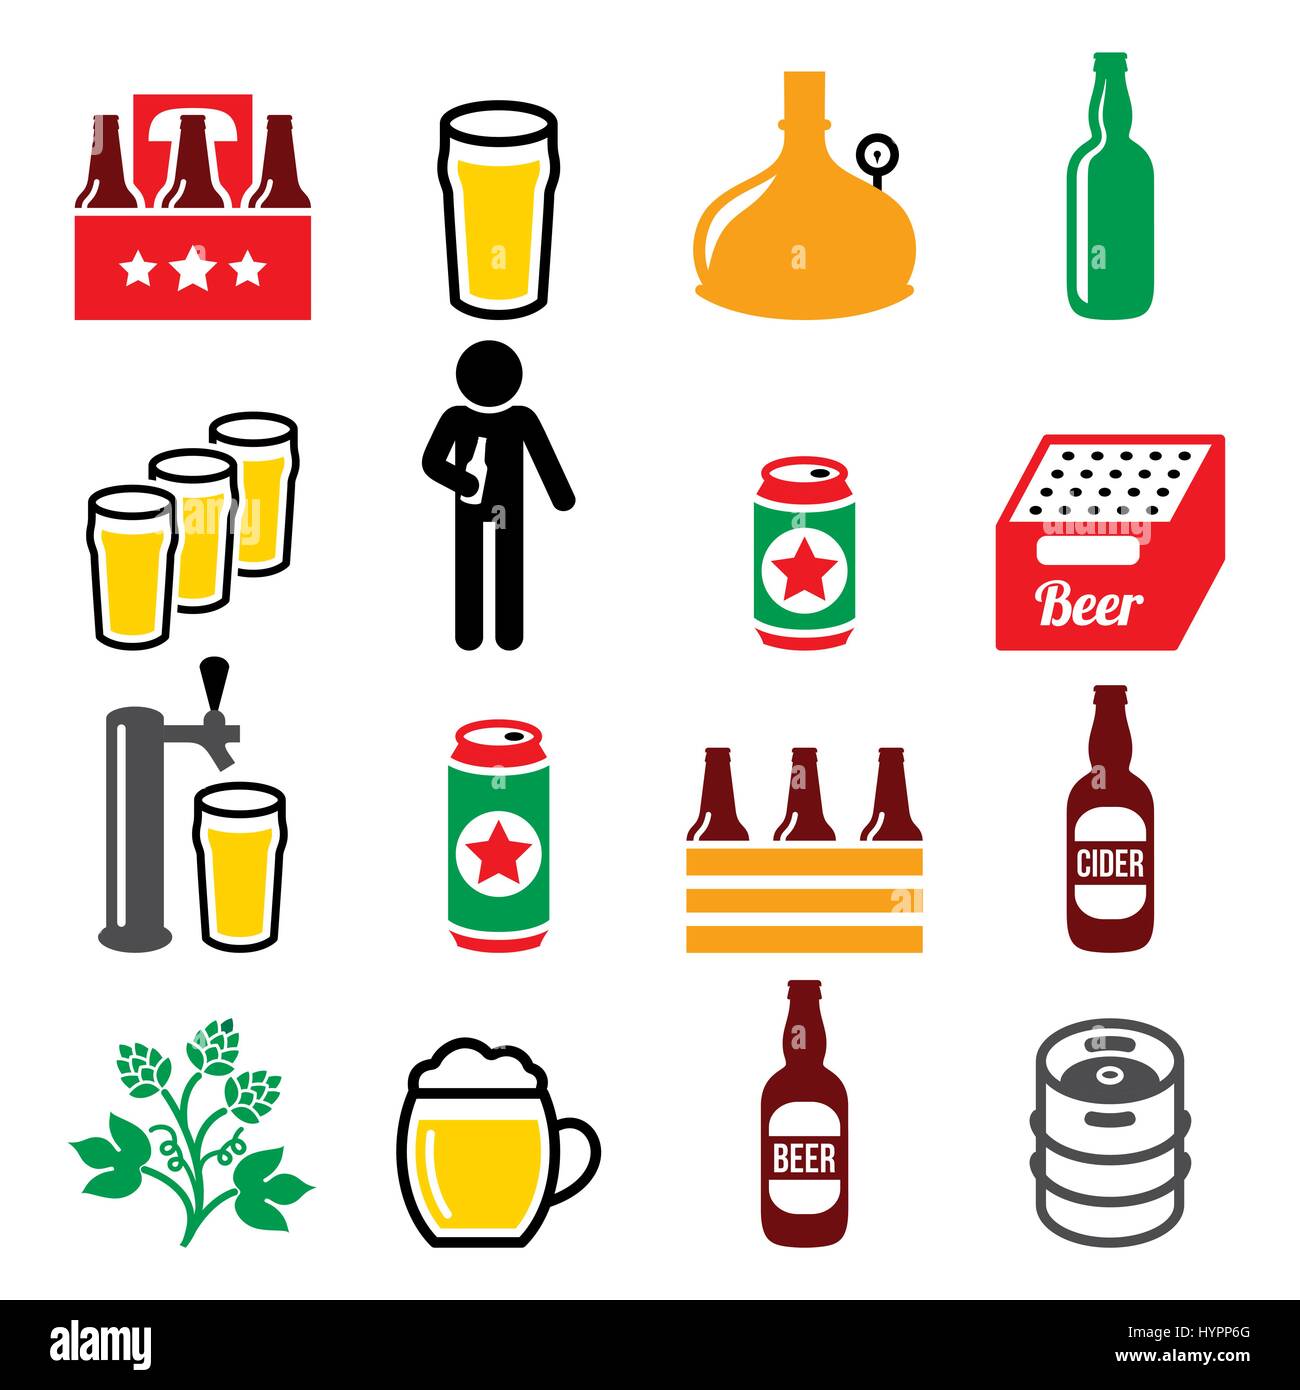 Beer, brewery, drinking alcohol in pub vector icons set Stock Vector